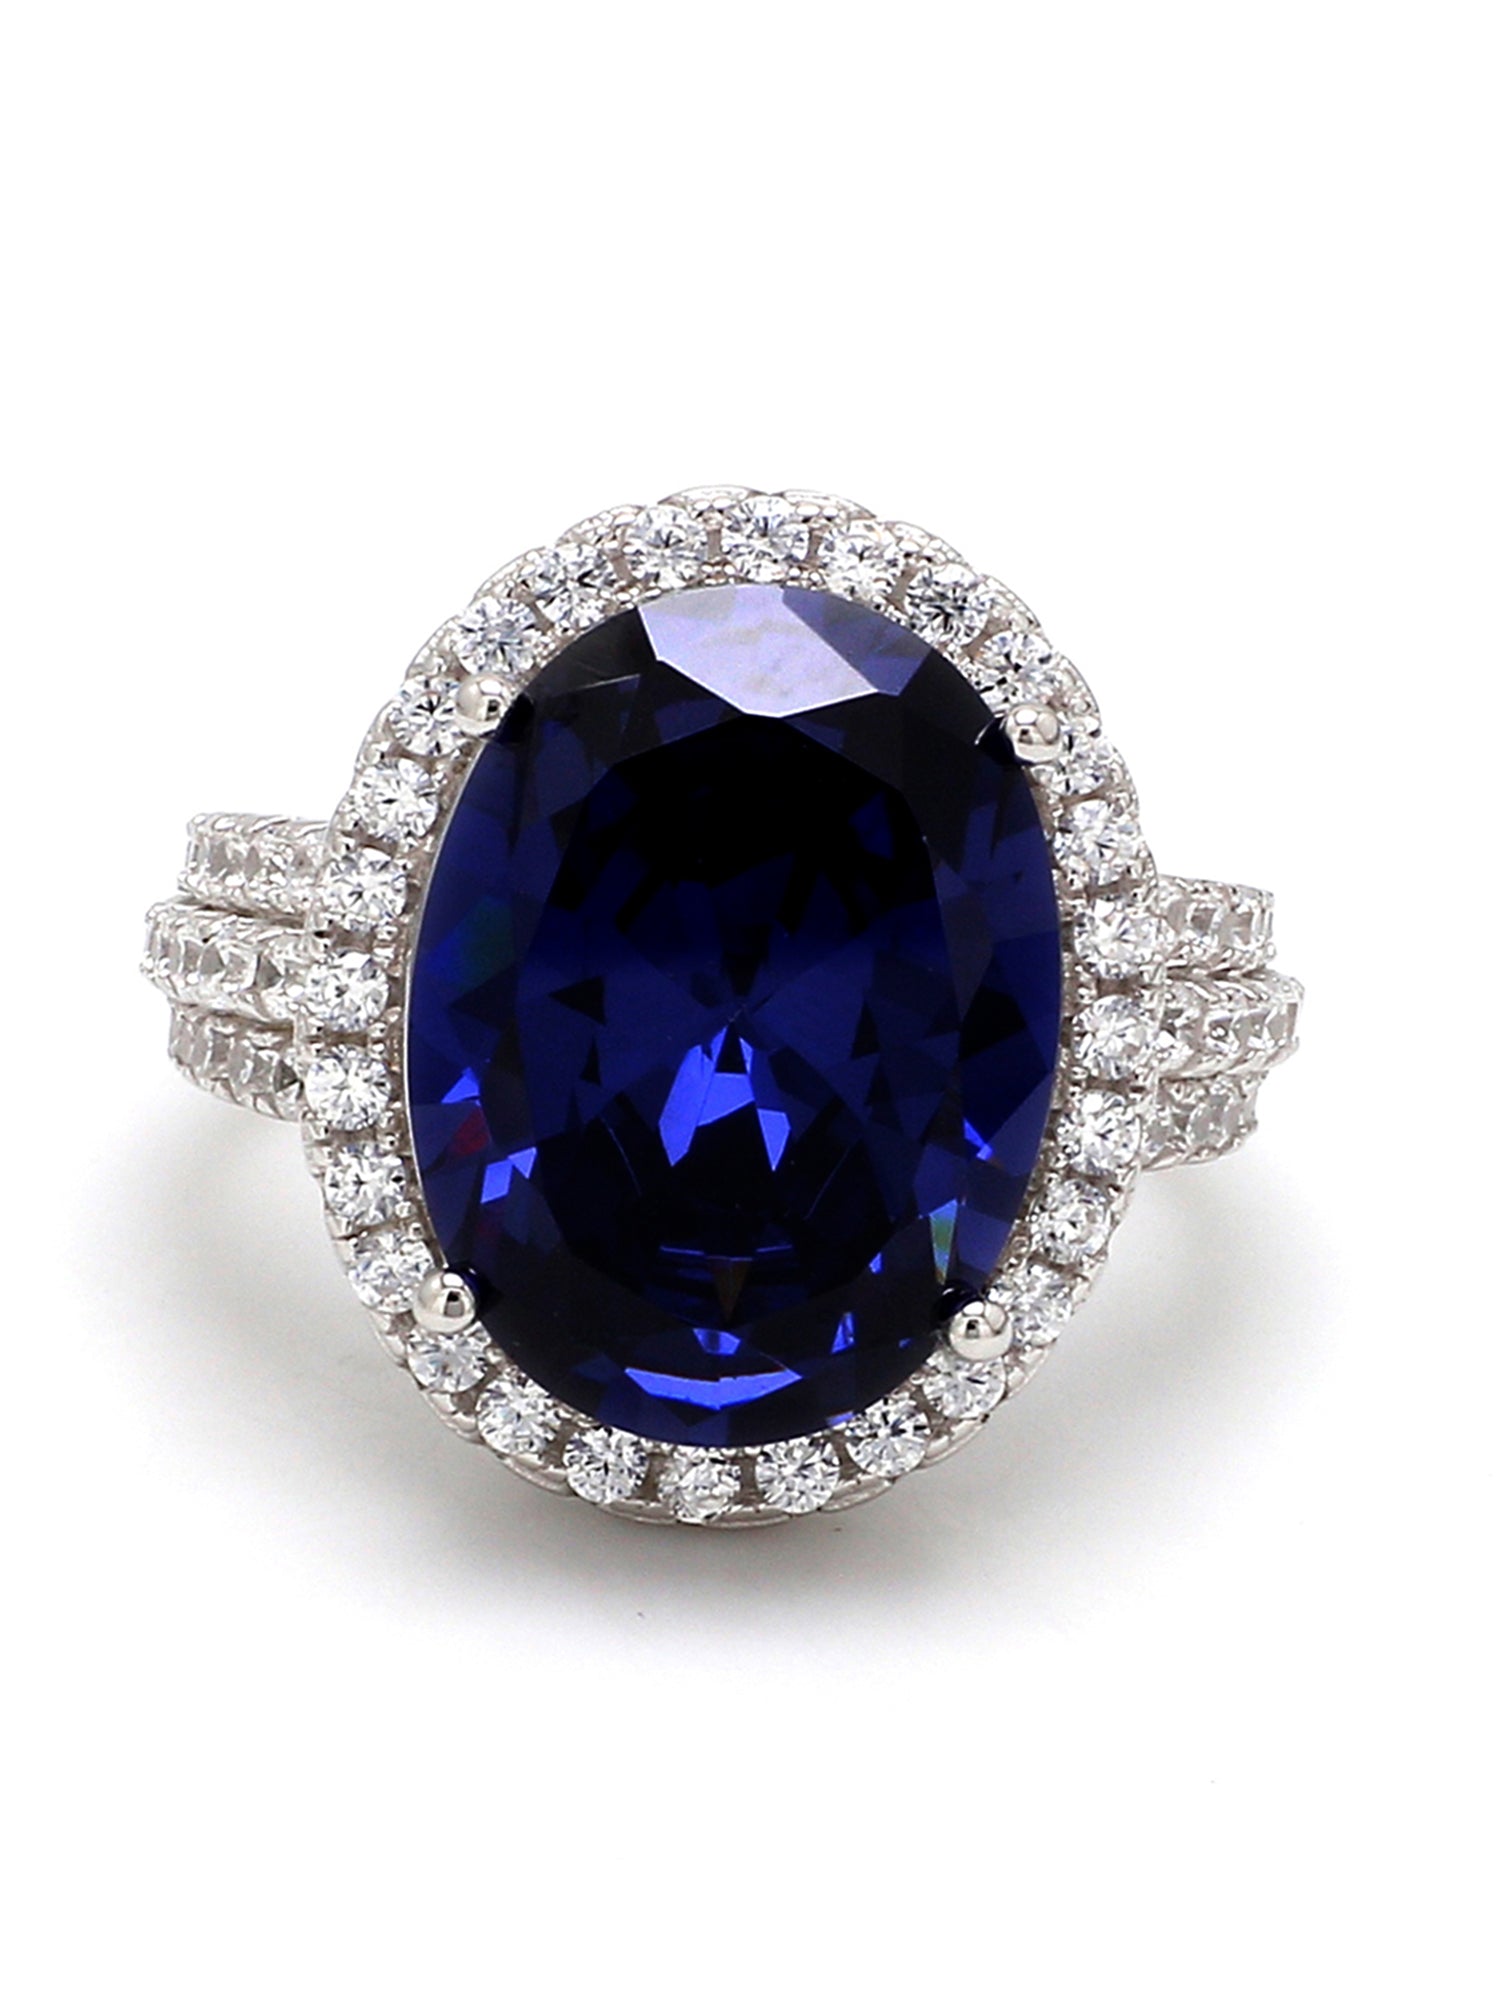 BLUE SAPPHIRE SILVER RING IN OVAL SHAPE-1